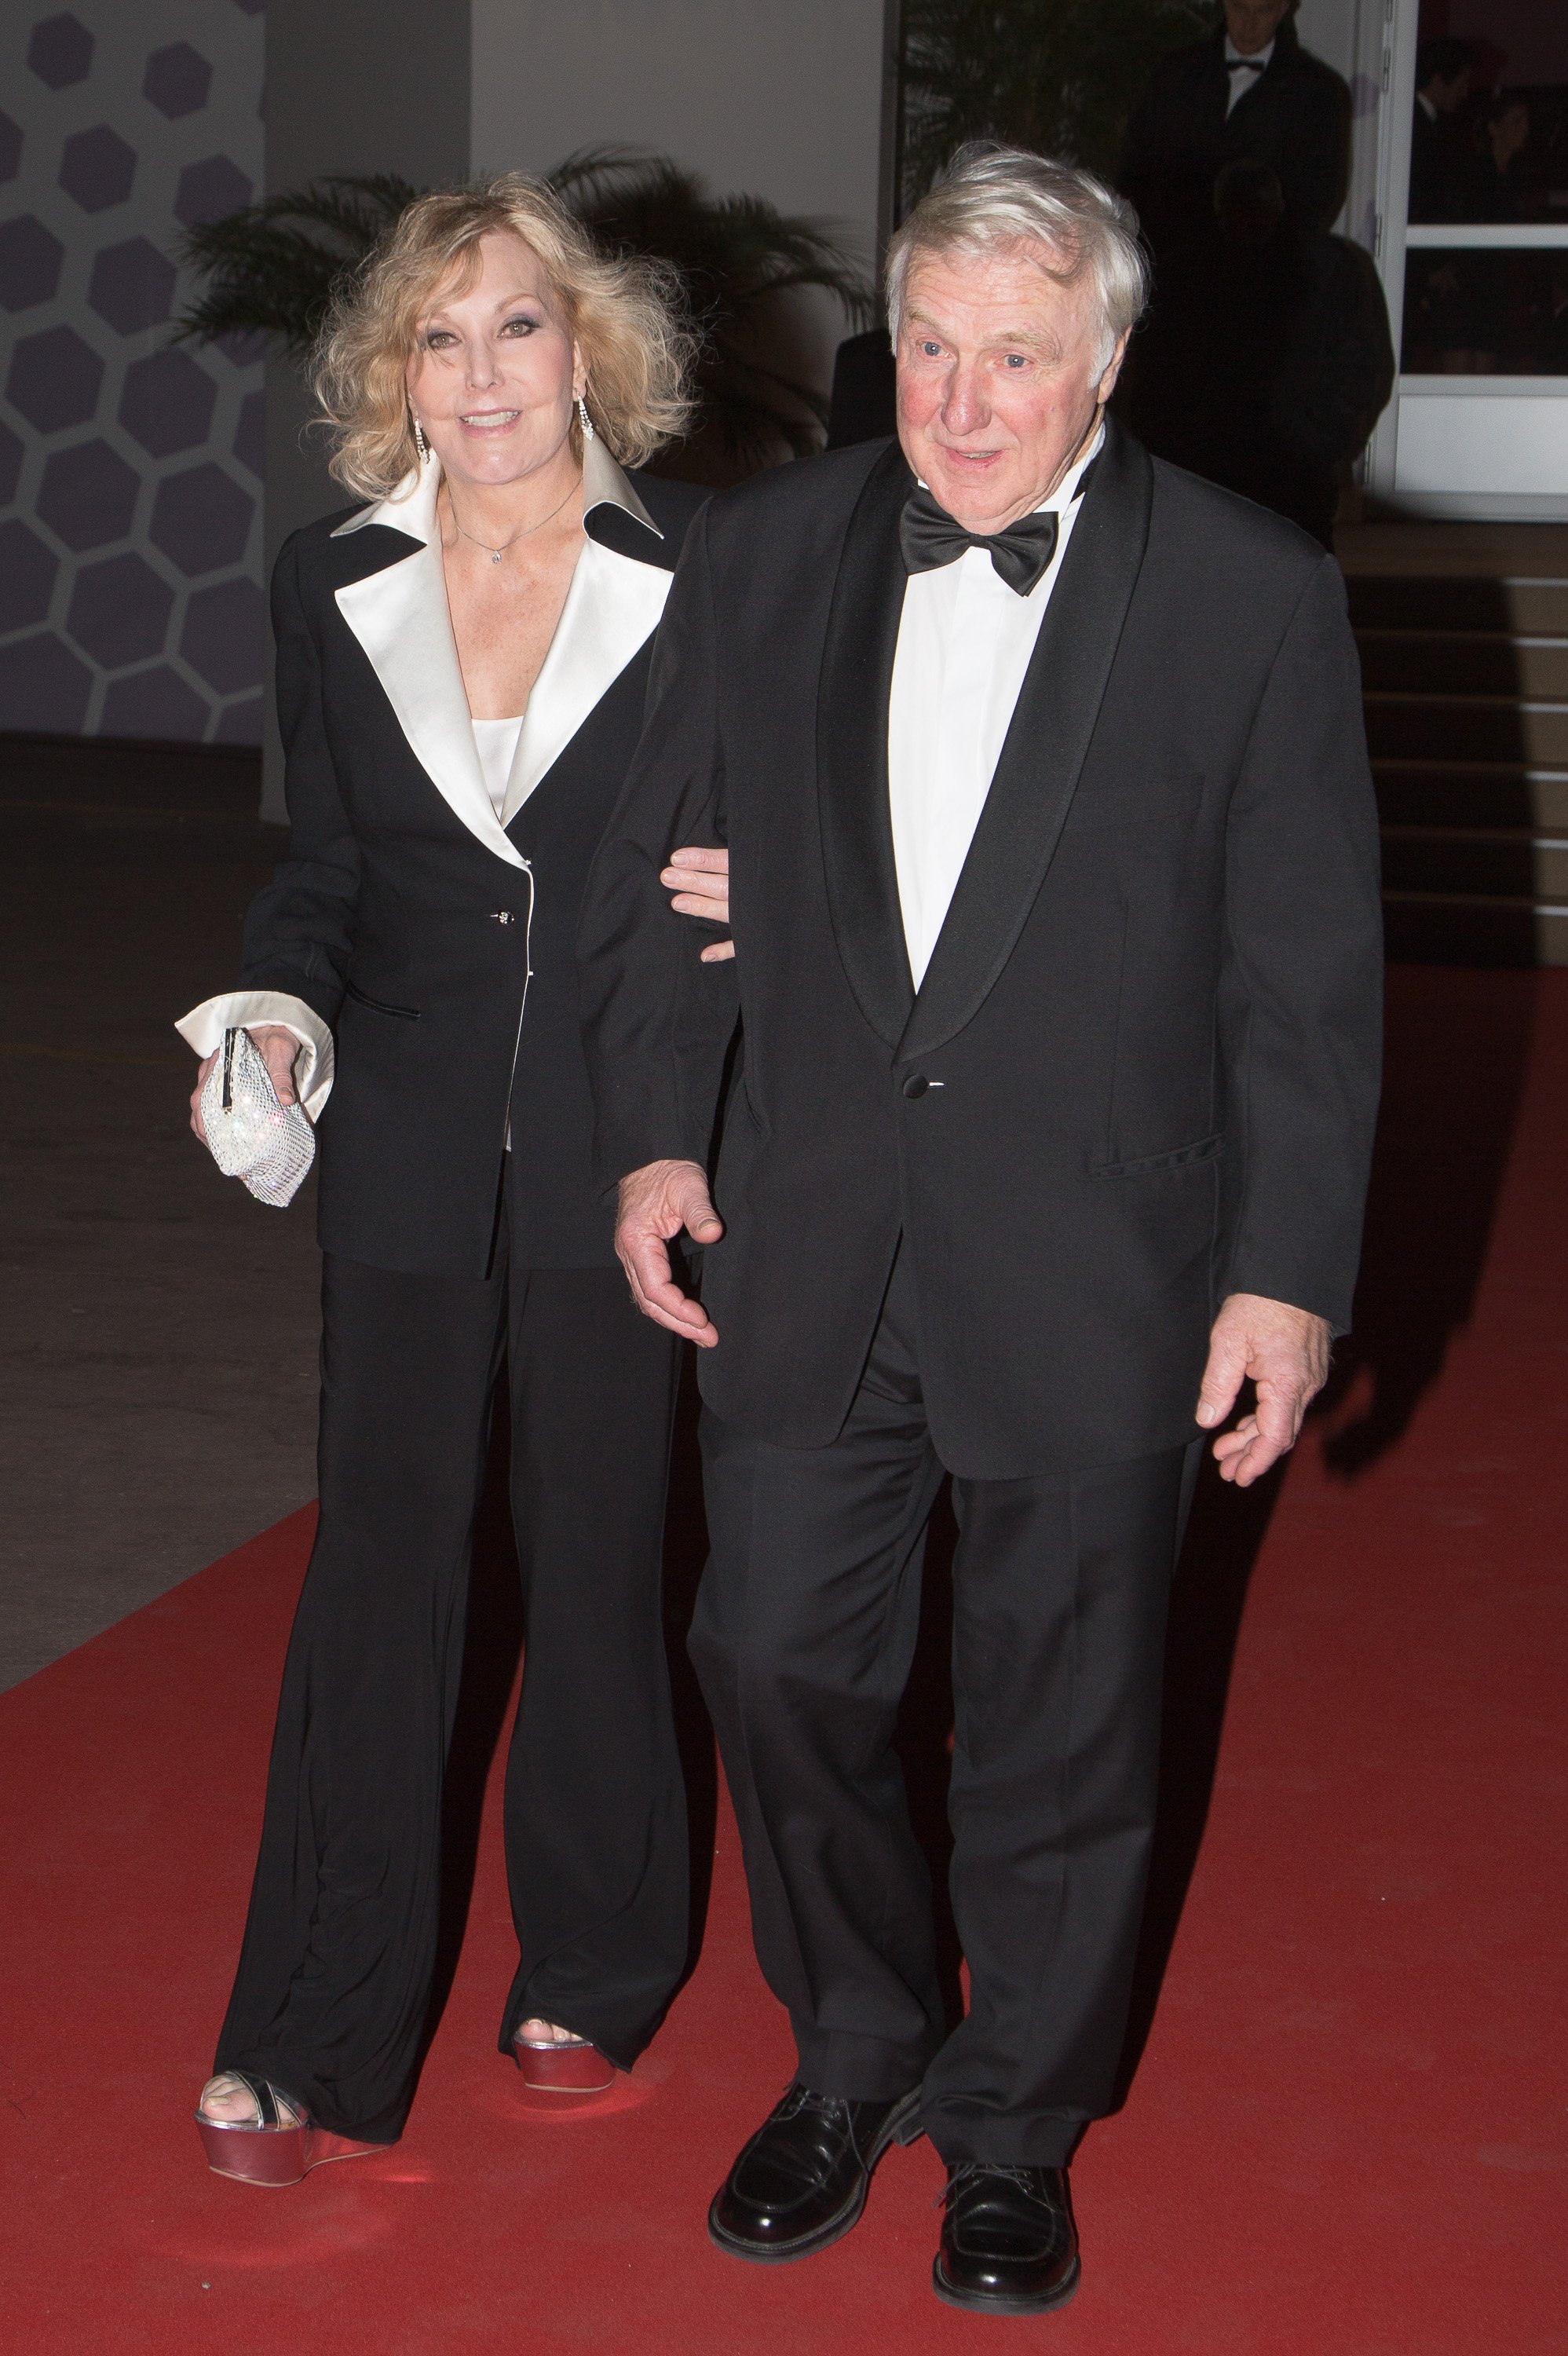 Kim Novak and Robert Malloy leave the "Agora" dinner during the 66th Annual Cannes Film Festival on May 25, 2013 in Cannes, France. | Photo: Getty Images